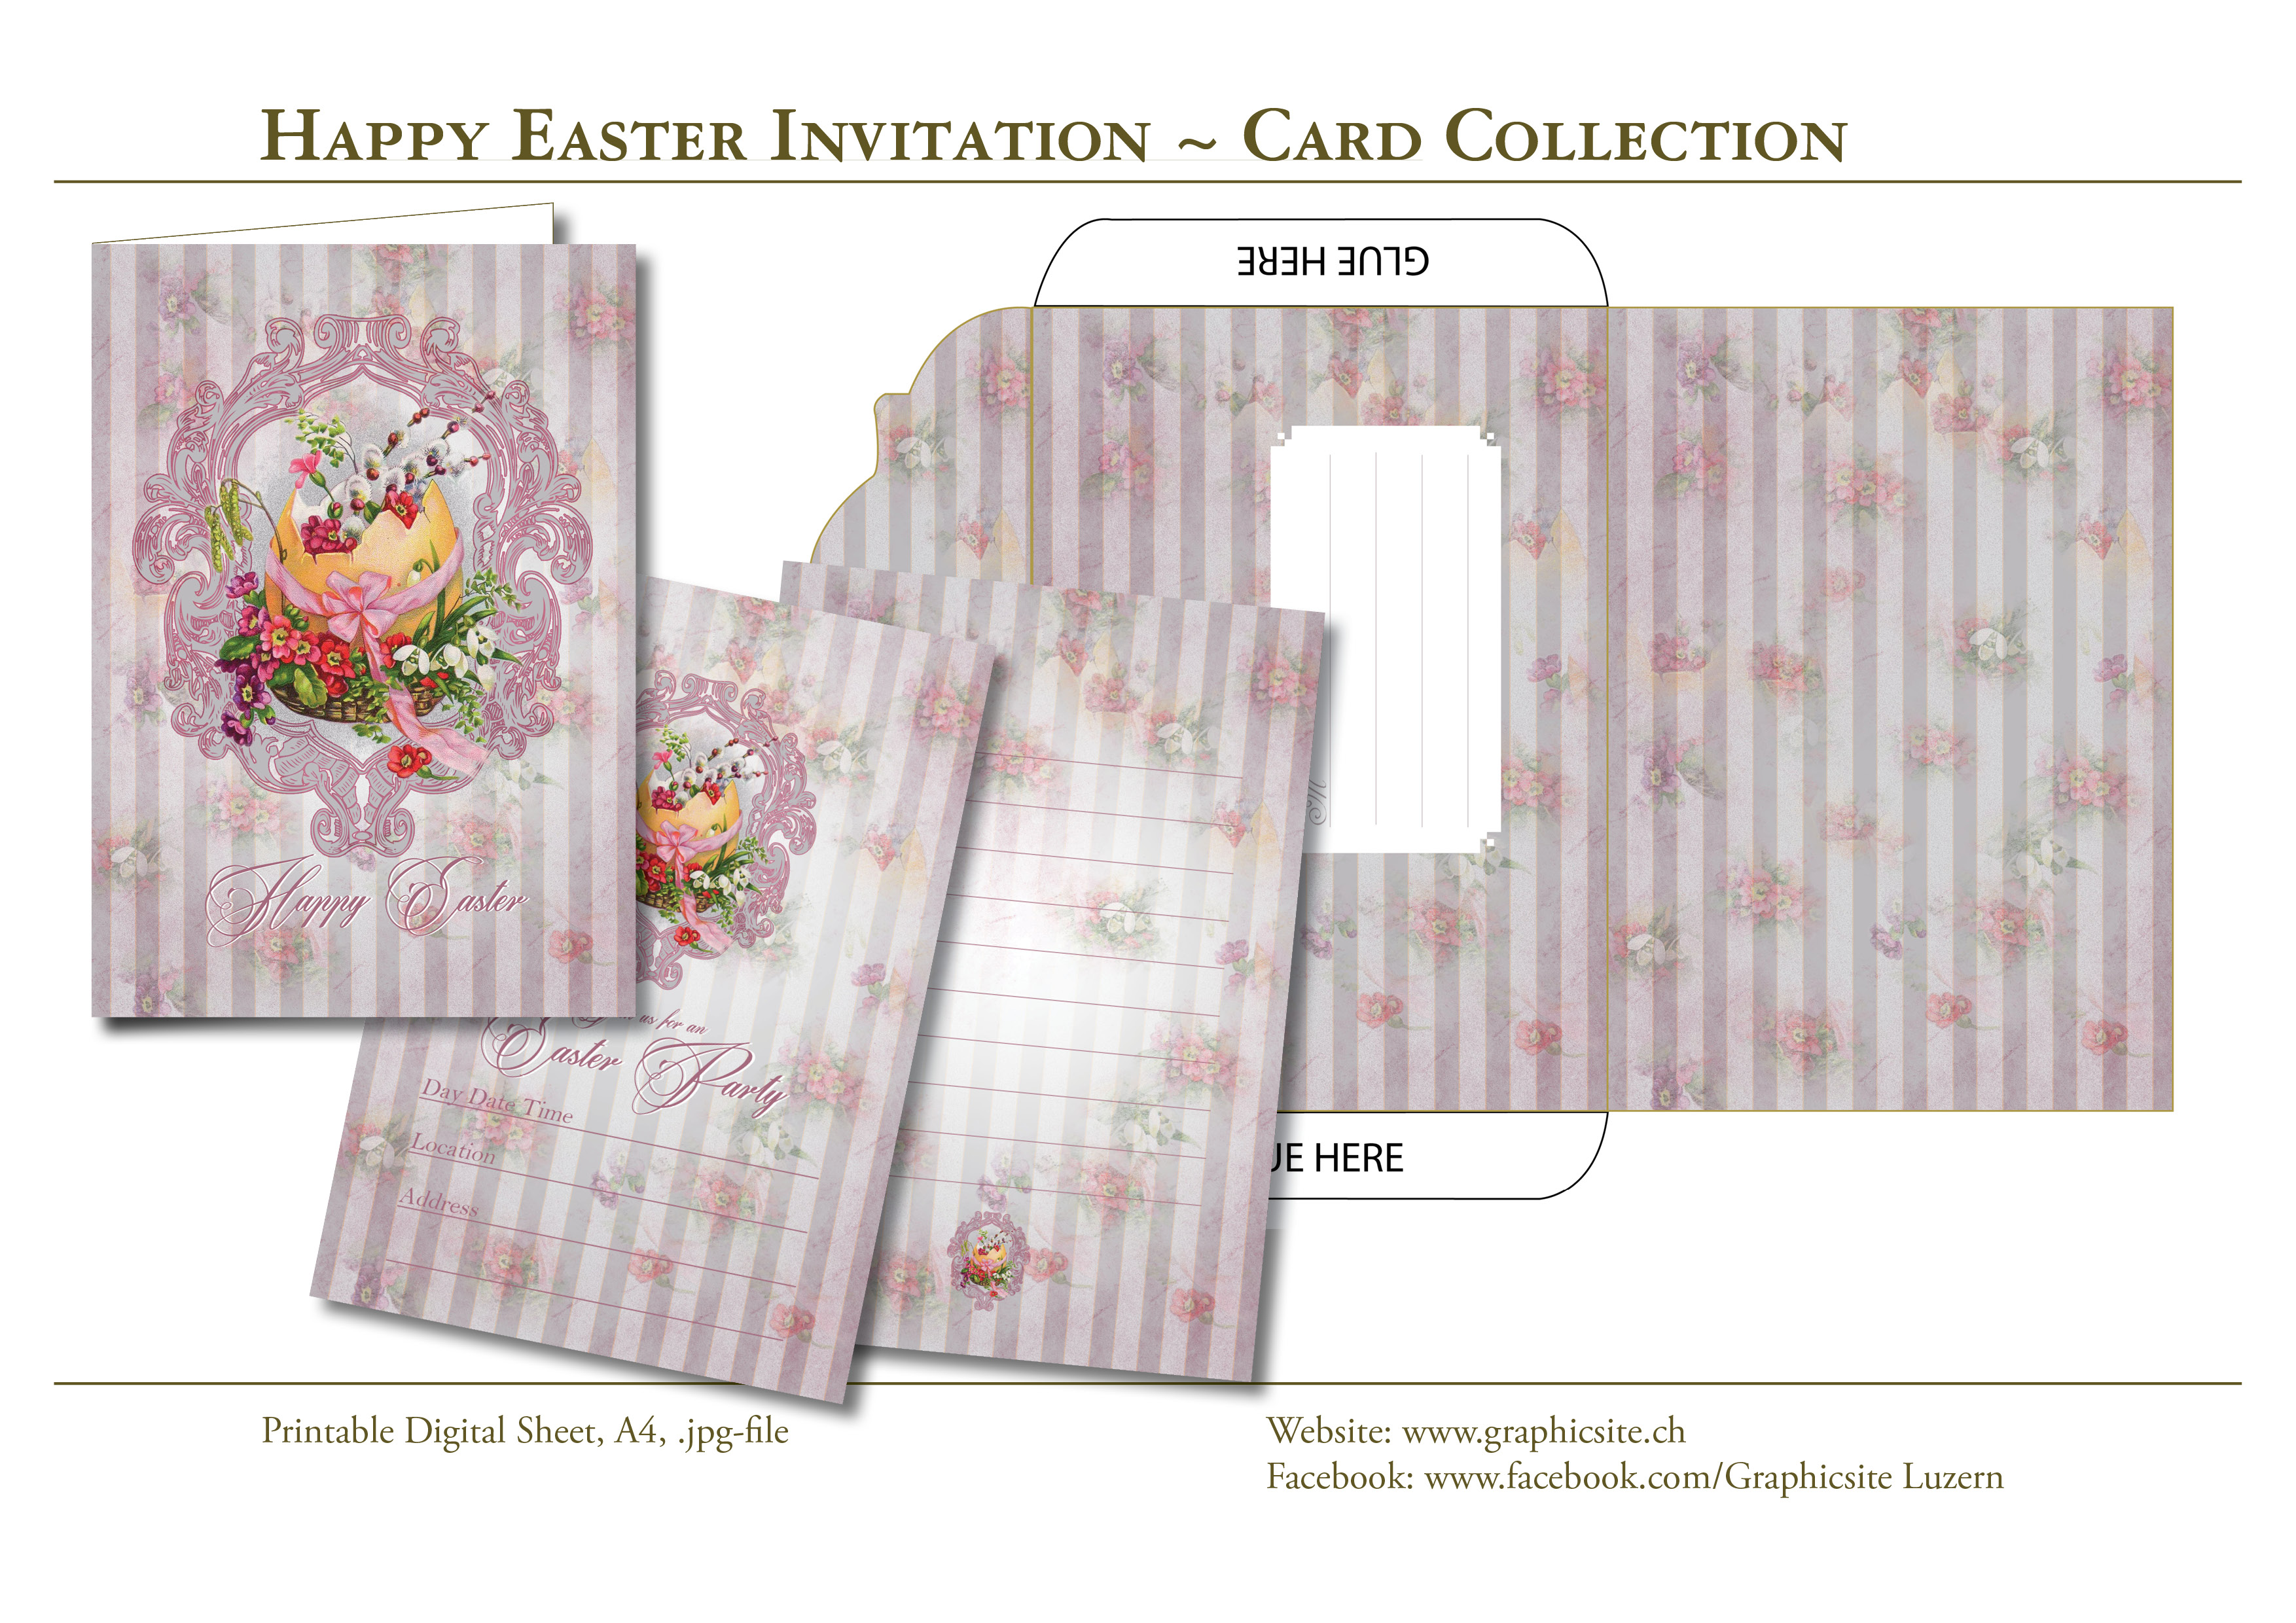 Printable Digital Sheets - 5x7 Card Collection - Happy Easter - Invitation  Cards, Envelope, Notecard, Graphicdesign Luzern, Schweiz